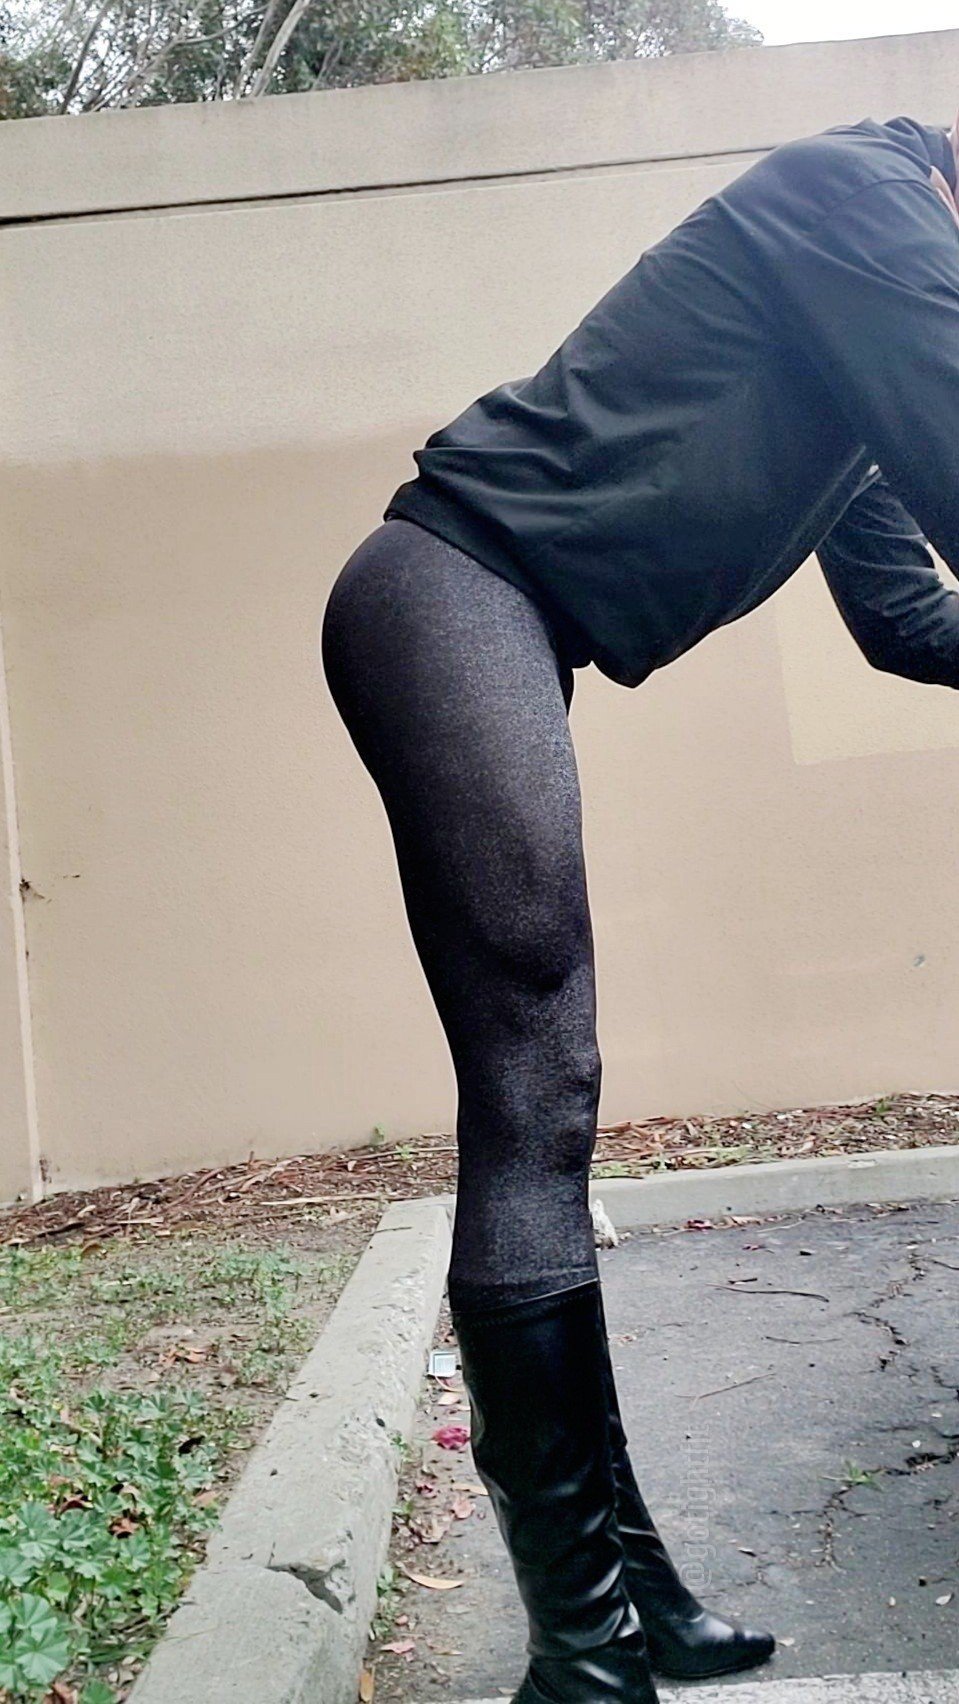 Watch the Photo by GoTightFit with the username @gotightfit, posted on September 27, 2020. The post is about the topic Gay. and the text says 'legging wear in public

#gotightfit #tight #leggings #highheel #hot #buns #ass'